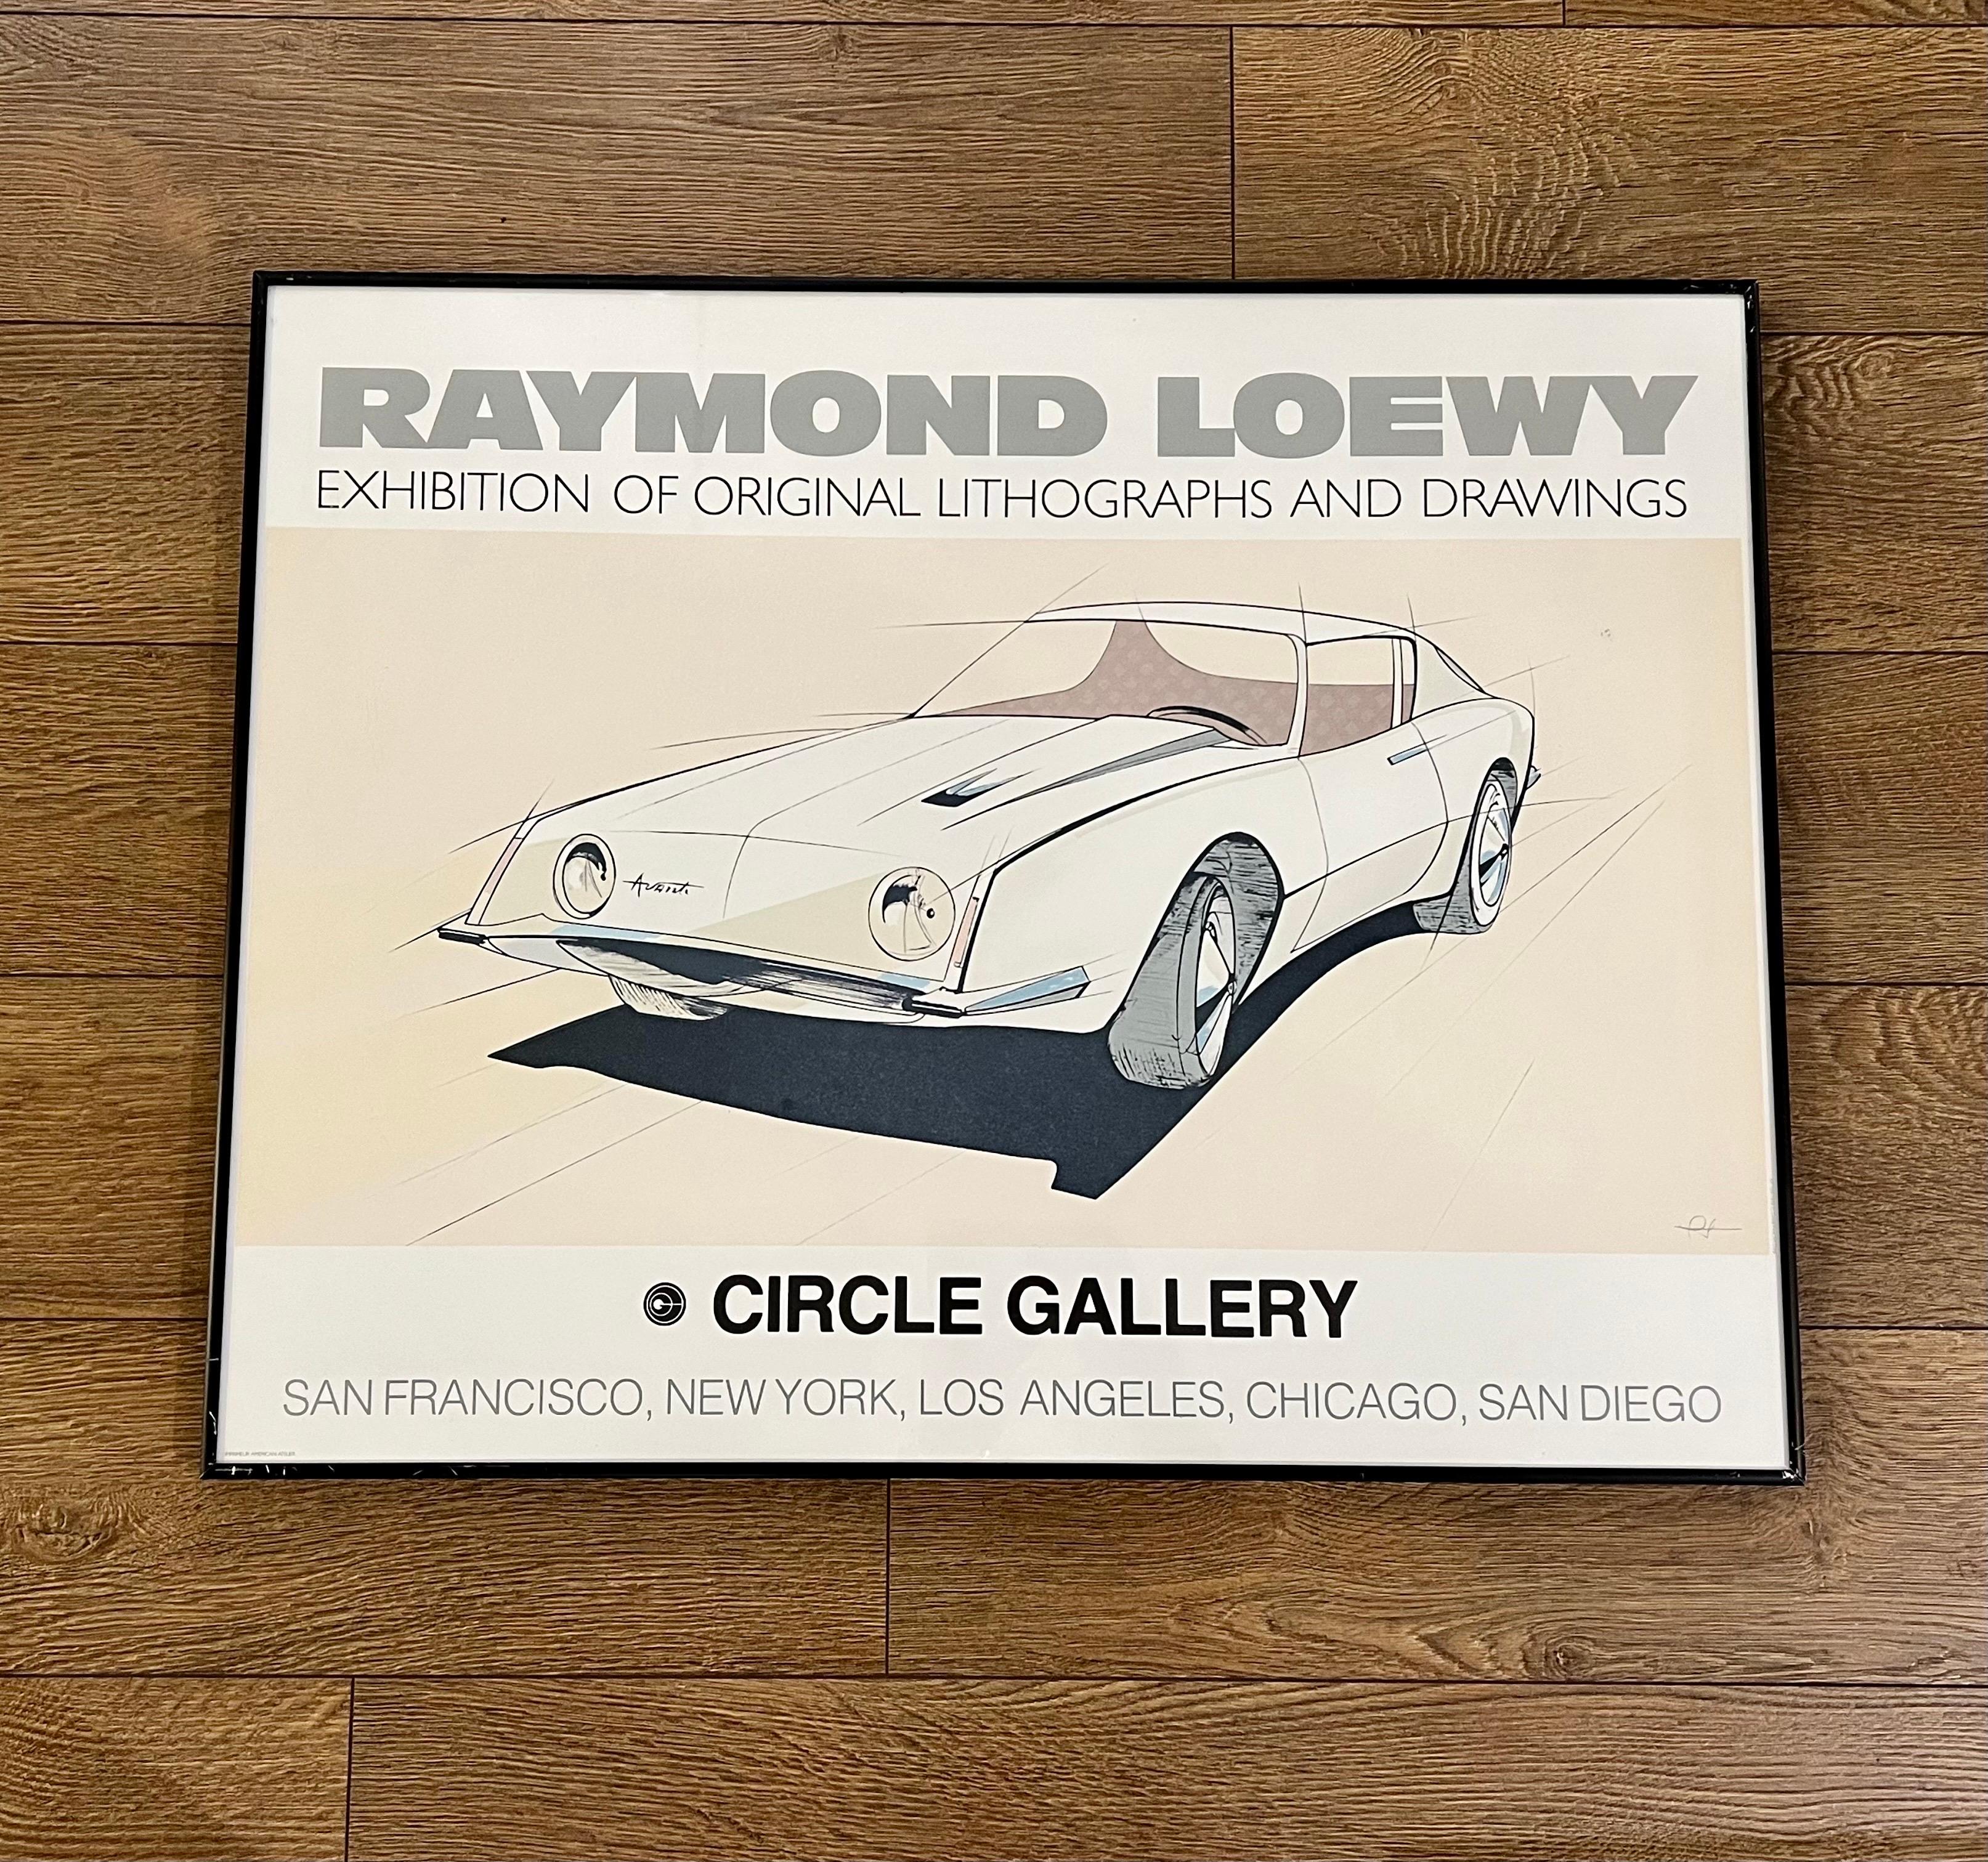 American Rare Collectible Exhibition Framed Poster of Raymond Loewy by Circle Gallery